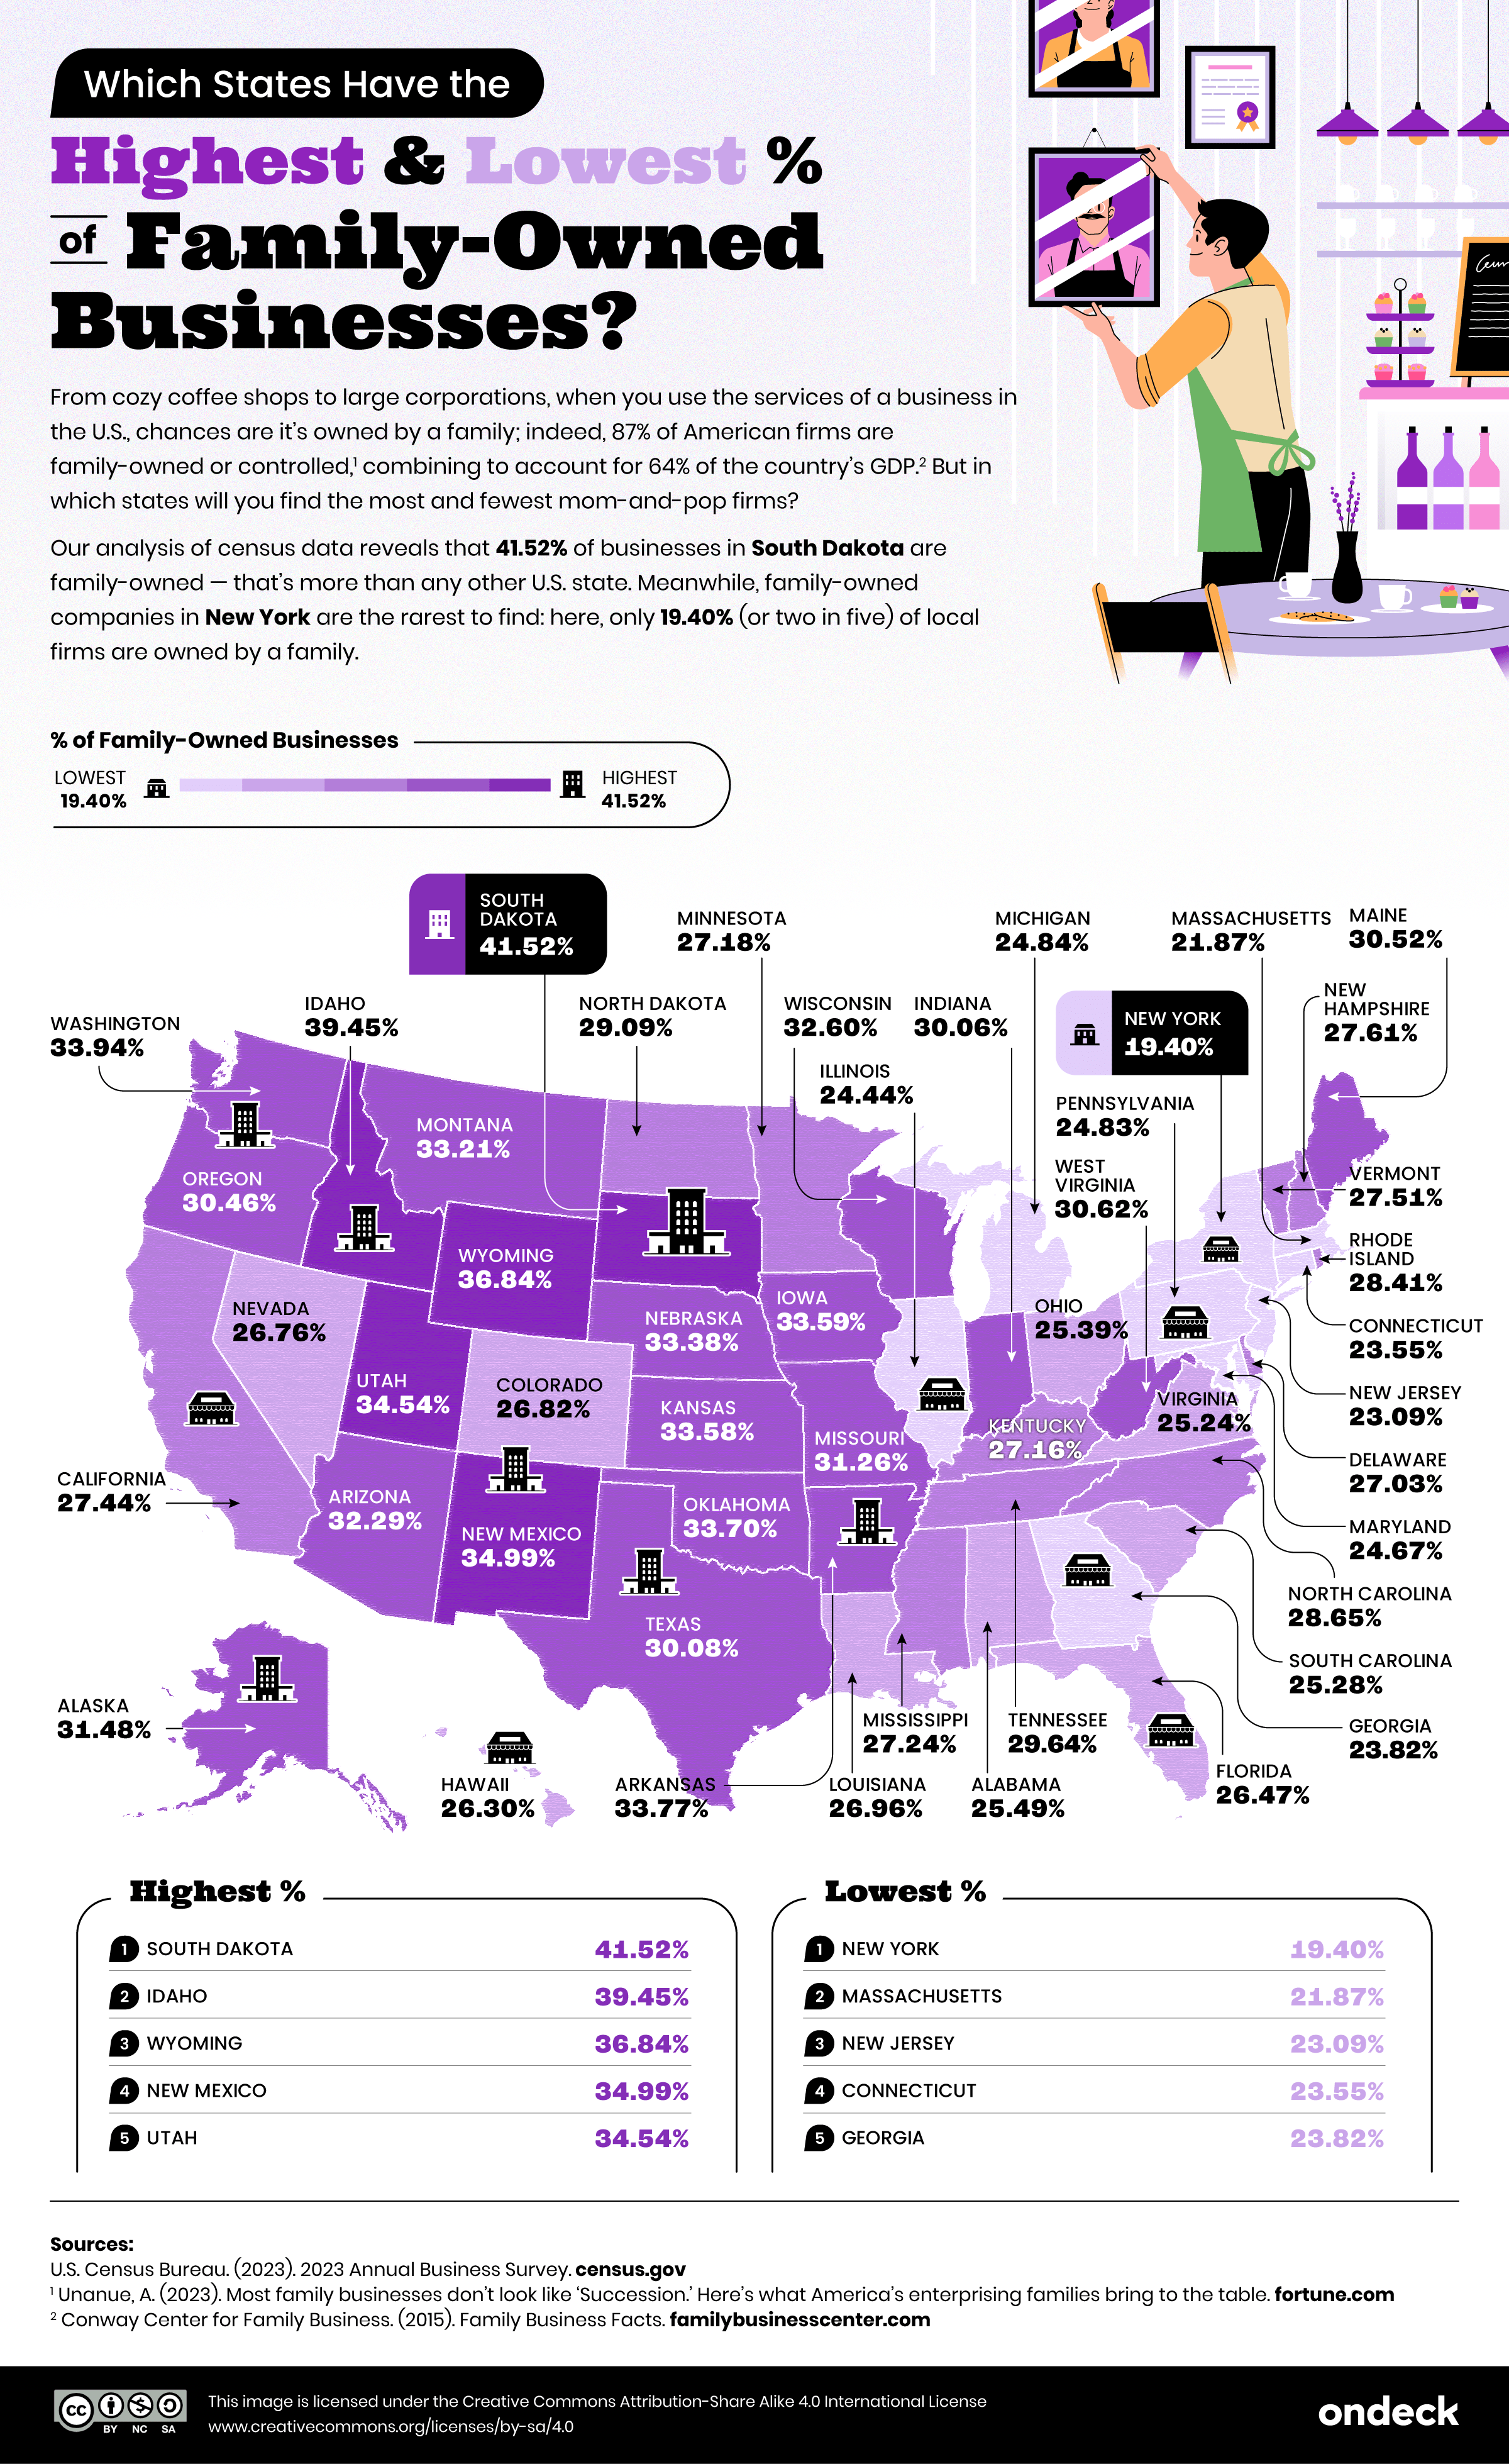 U.S. map showing which states have the highest and lowest percentage of family owned businesses